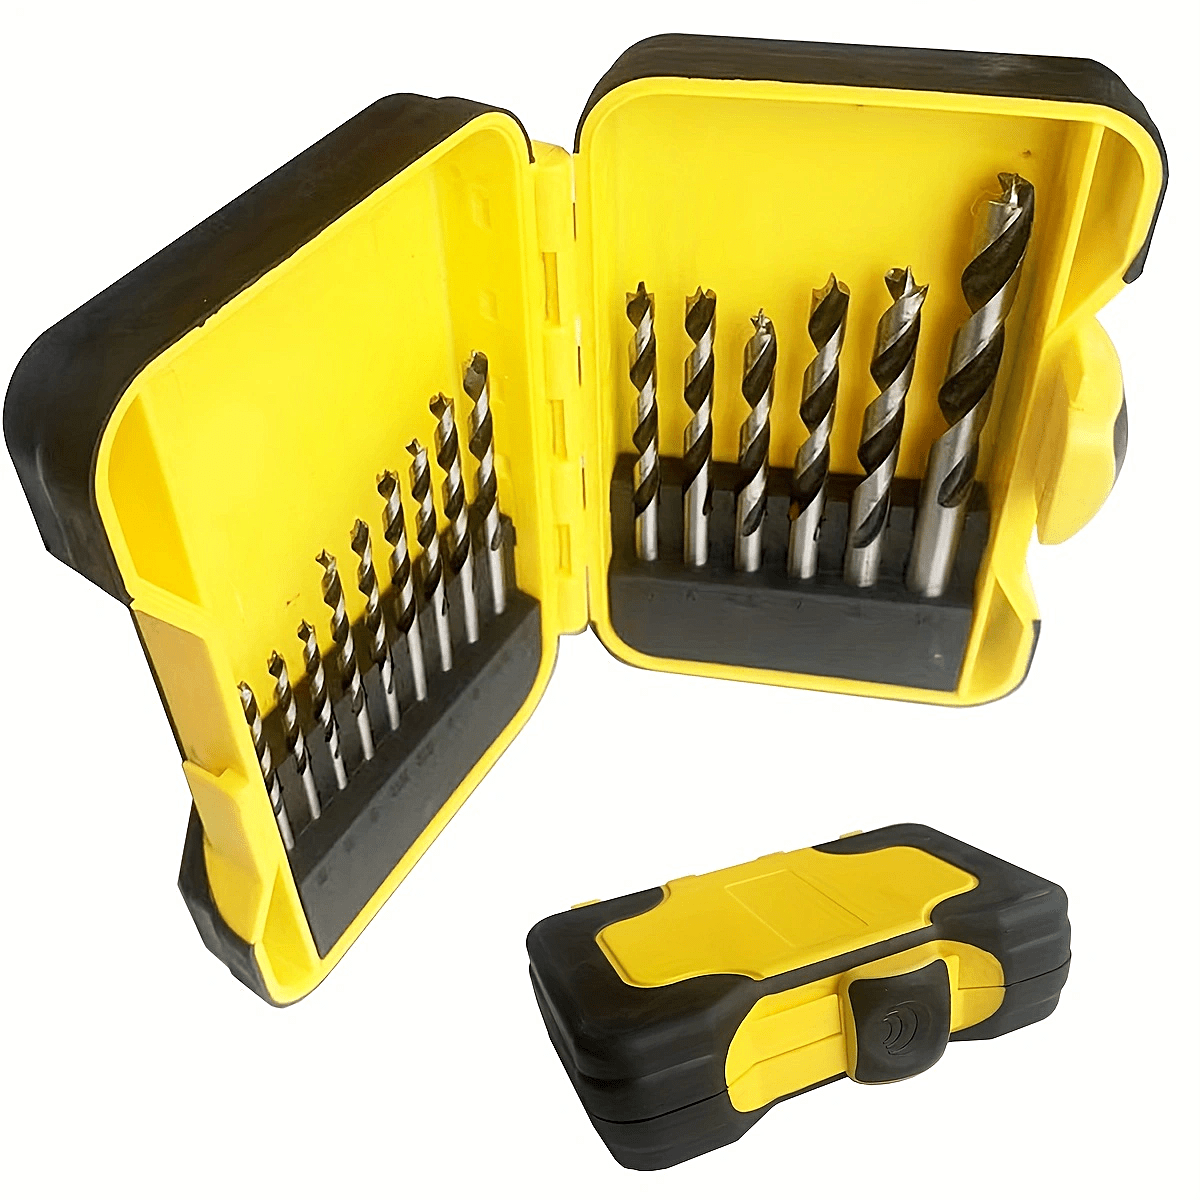 

15pcs Professional Woodworking Drill Bit Set, 3-point Tip Design, High Precision Edge Cleaning, With Durable Storage Box, 3mm-10mm Sizes, For Wood Drilling And Carpentry